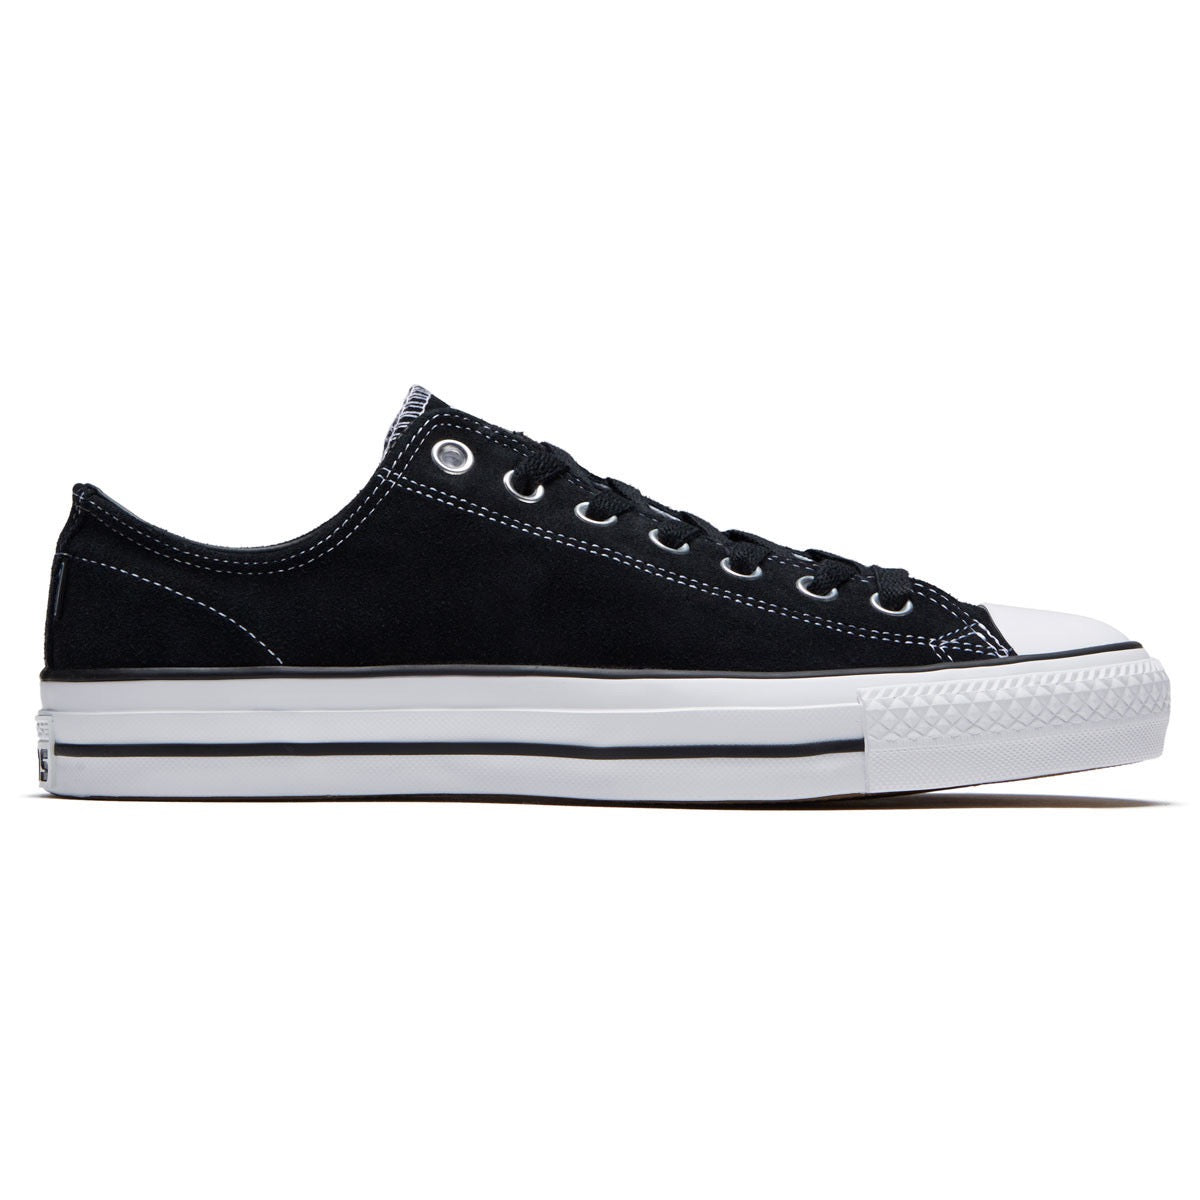 Converse CTAS Pro Ox Black/White Suede– Relief Skate Supply